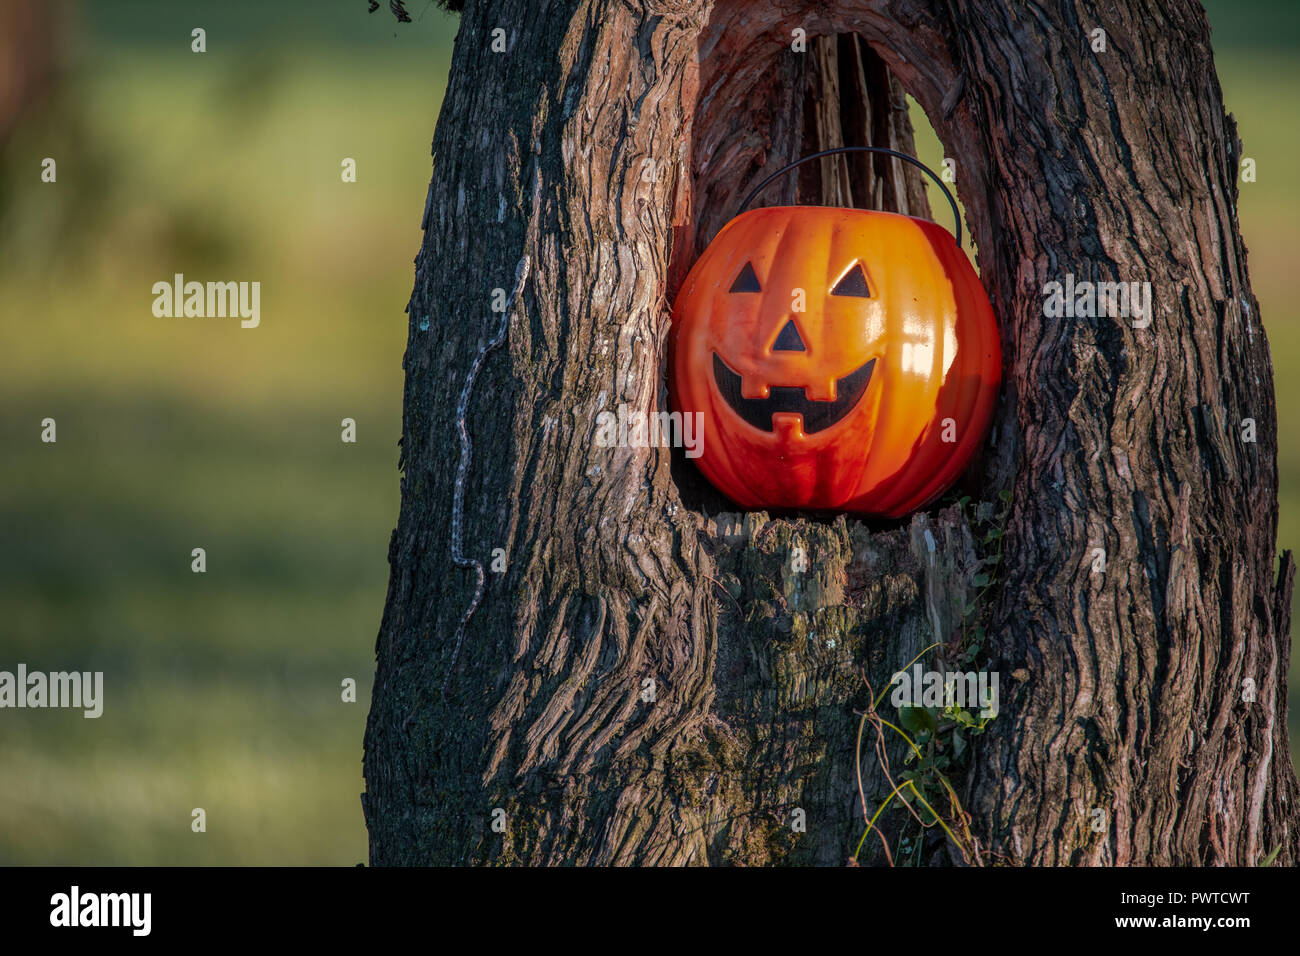 What's scarier than a Jack-O-Lantern in a hollowed out tree at Halloween? A real, wild Eastern Rat Snake (Pantherophis alleghaniensis) next to it! Stock Photo